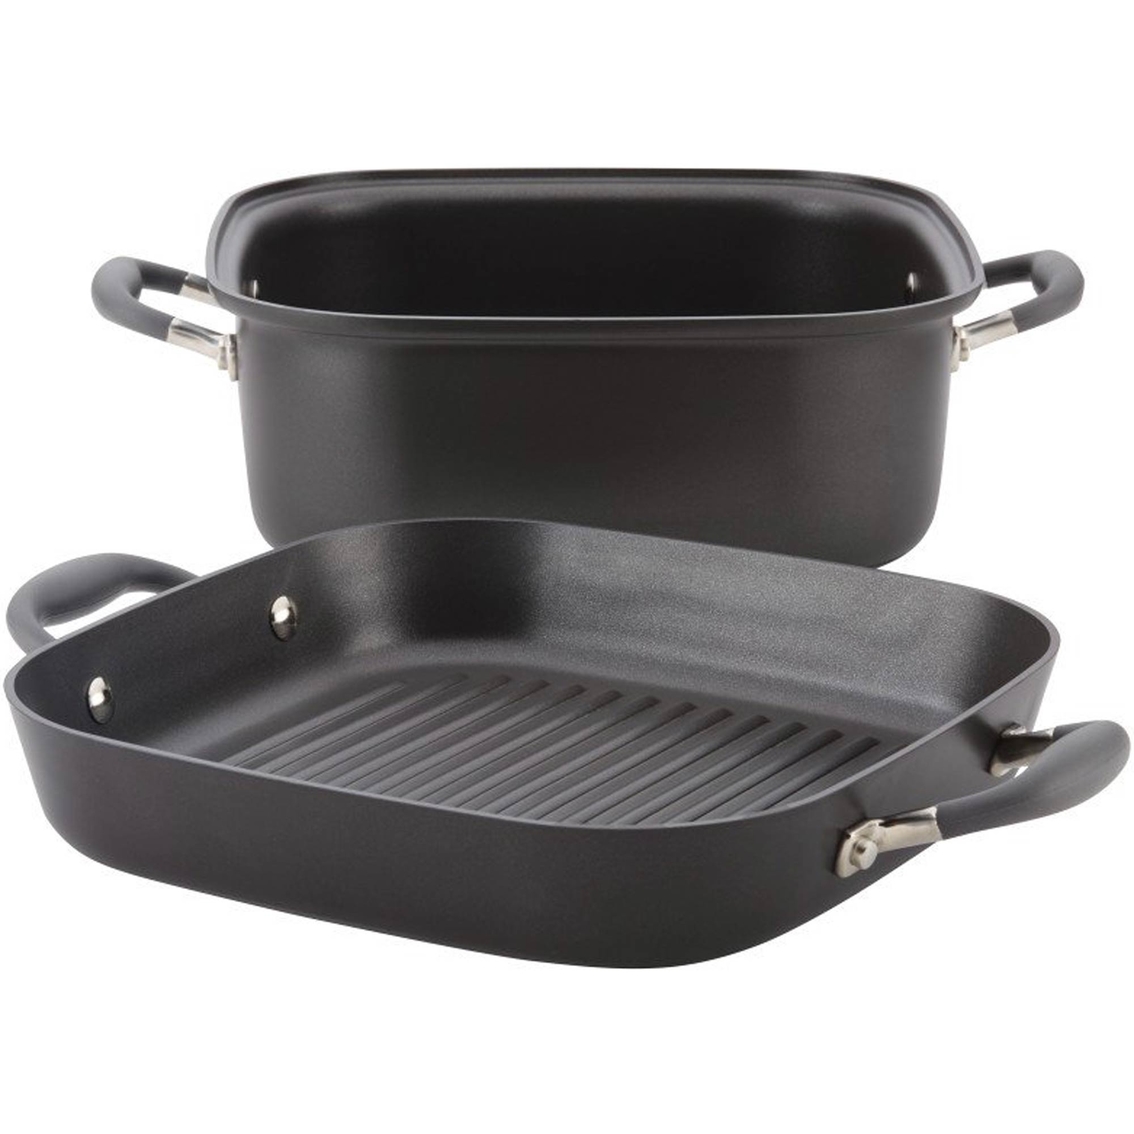 Meyer Anolon Nonstick 2-in-1 Deep Square Grill Pan and Square Roaster Set - Image 5 of 5